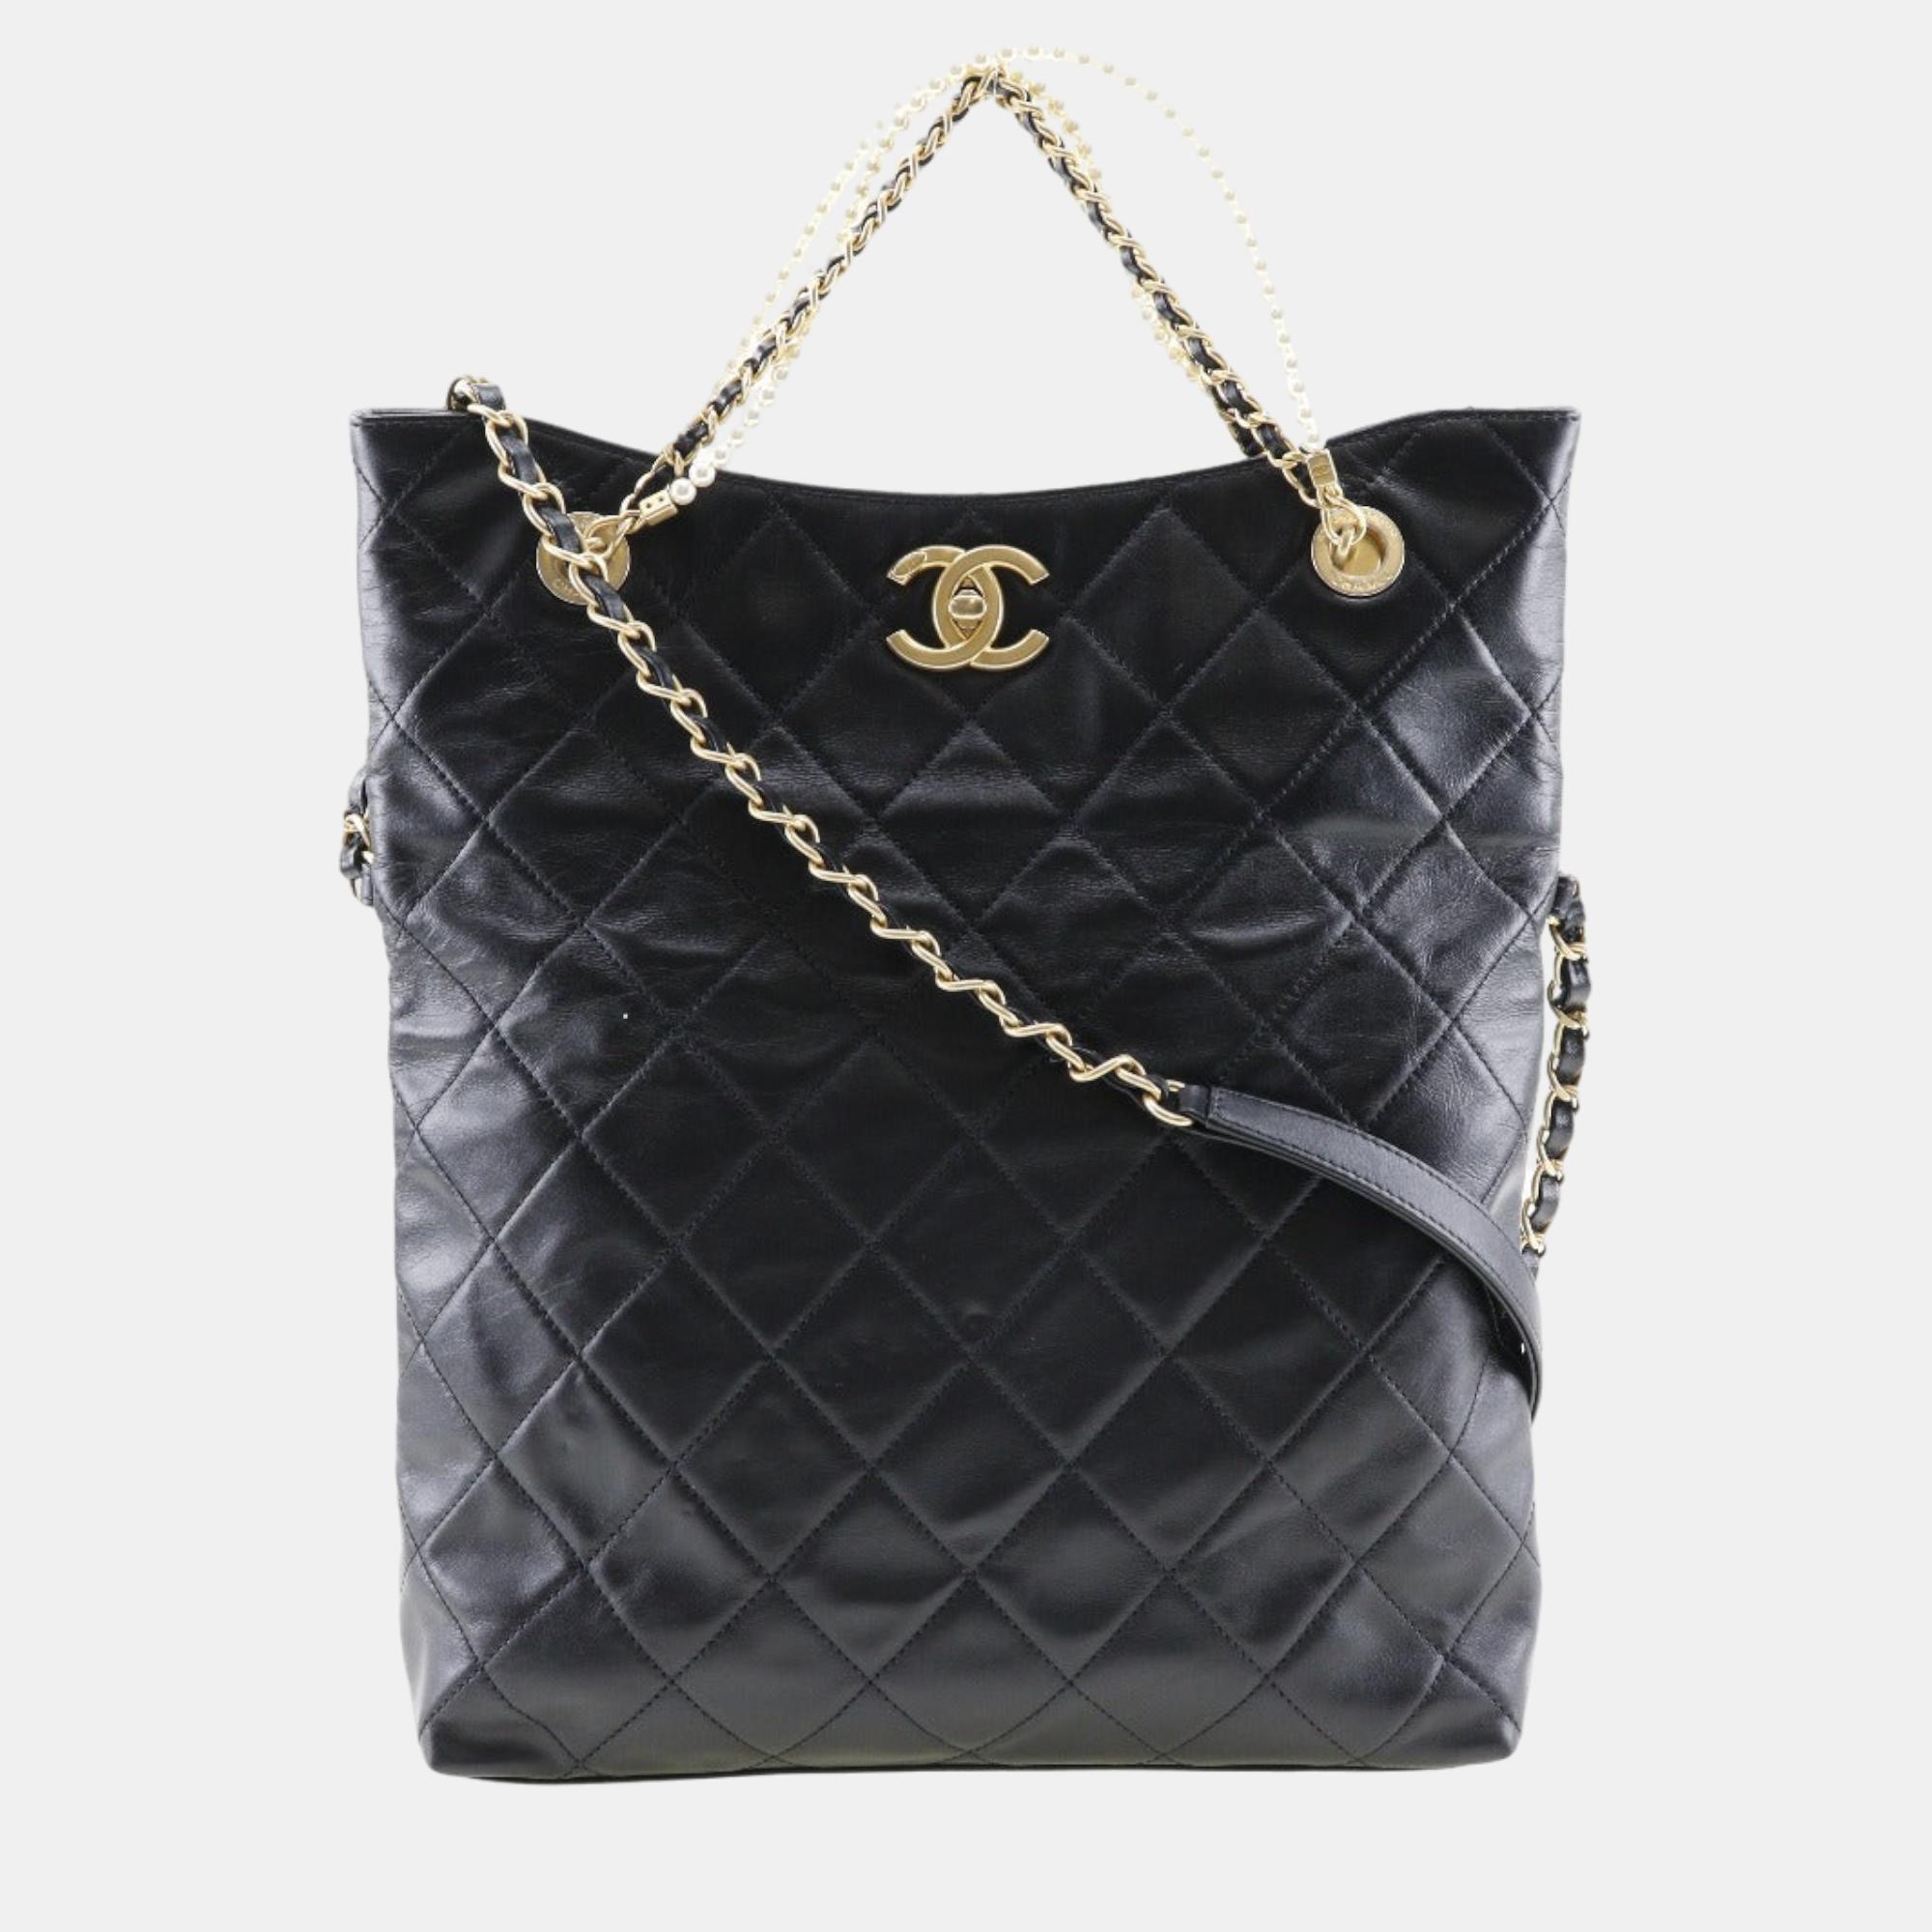 Pre-owned Chanel Black Calfskin Quilted Large Retro Chain Tote